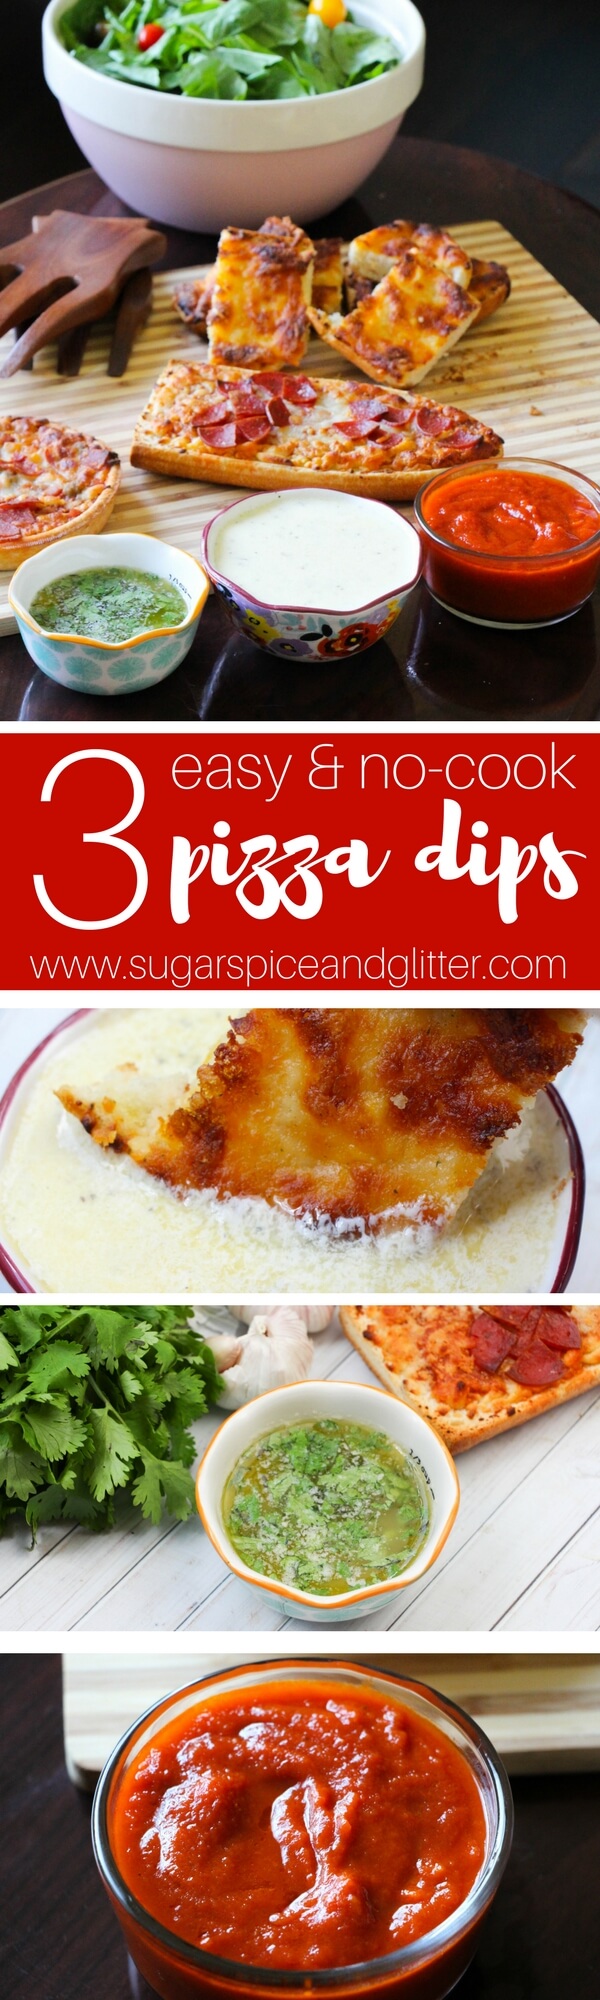 Spicy marinara, garlic parmesan and a buttery herb pizza dip - 3 easy pizza dips ready in under a minute! The perfect addition to your family pizza night